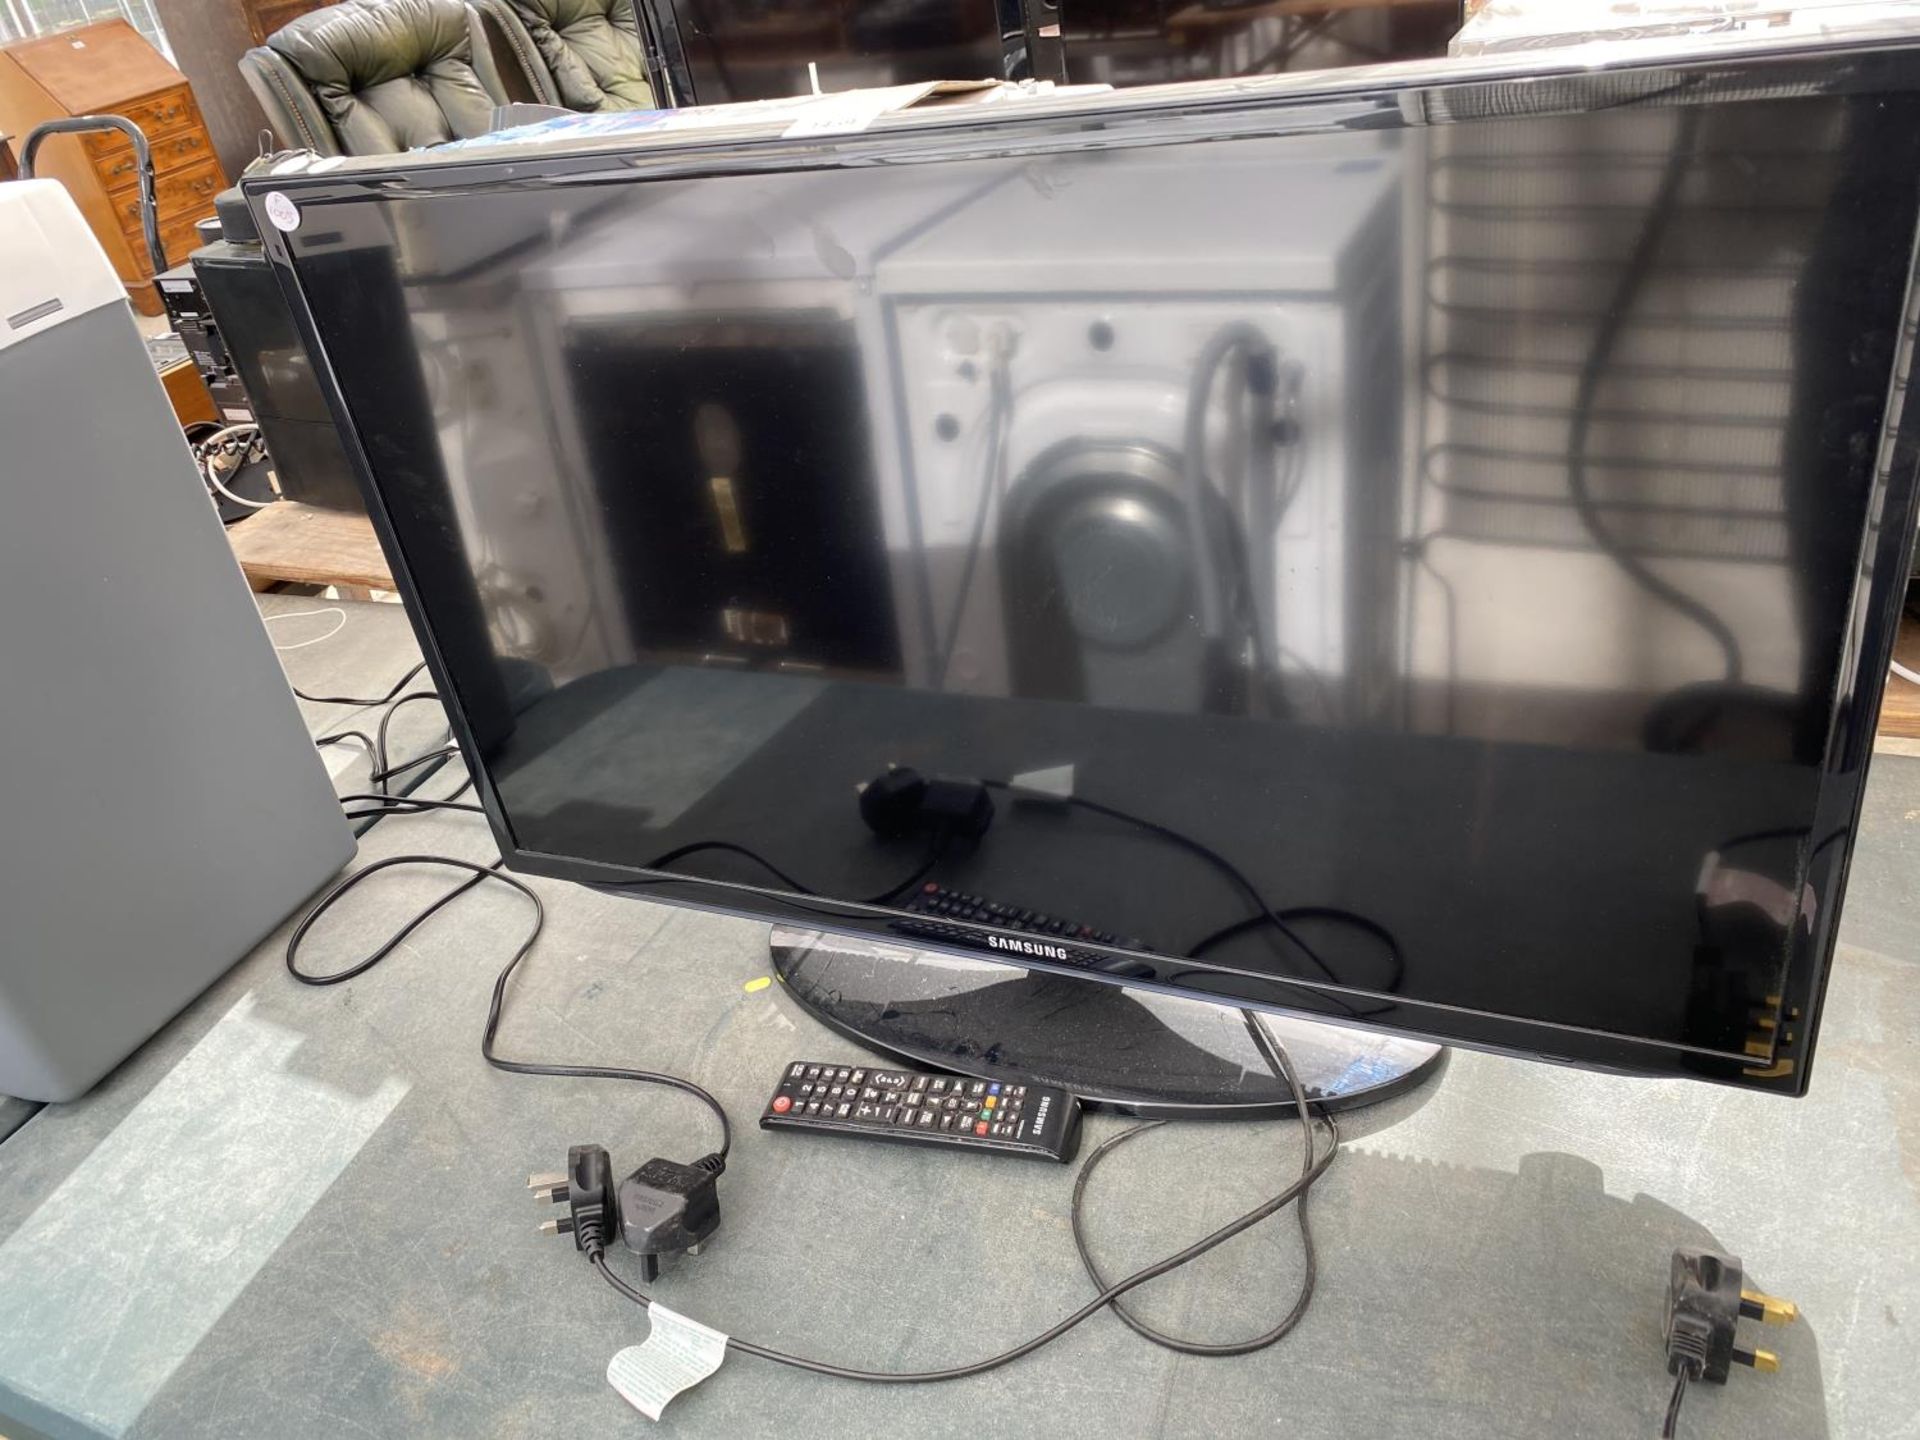 A SAMSUNG 32" TV WITH REMOTE CONTROL - IN WORKING ORDER